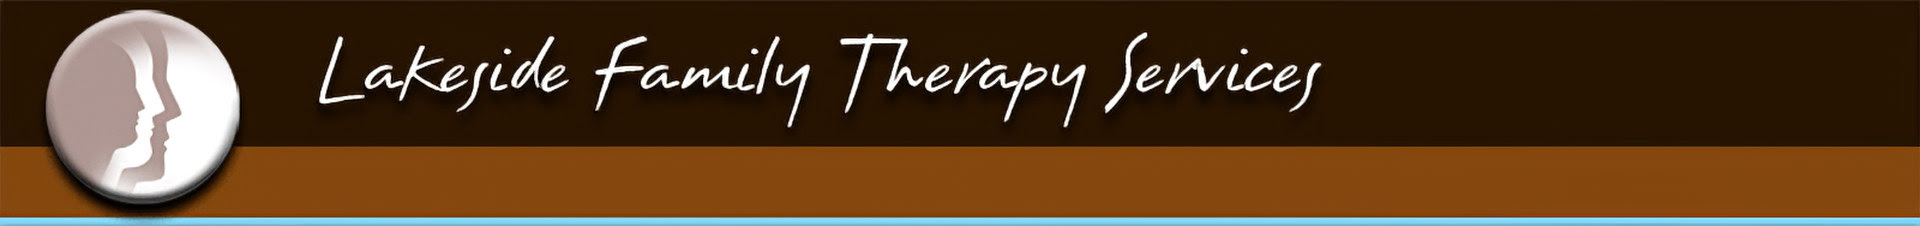 Lakeside Family Therapy Services Logo